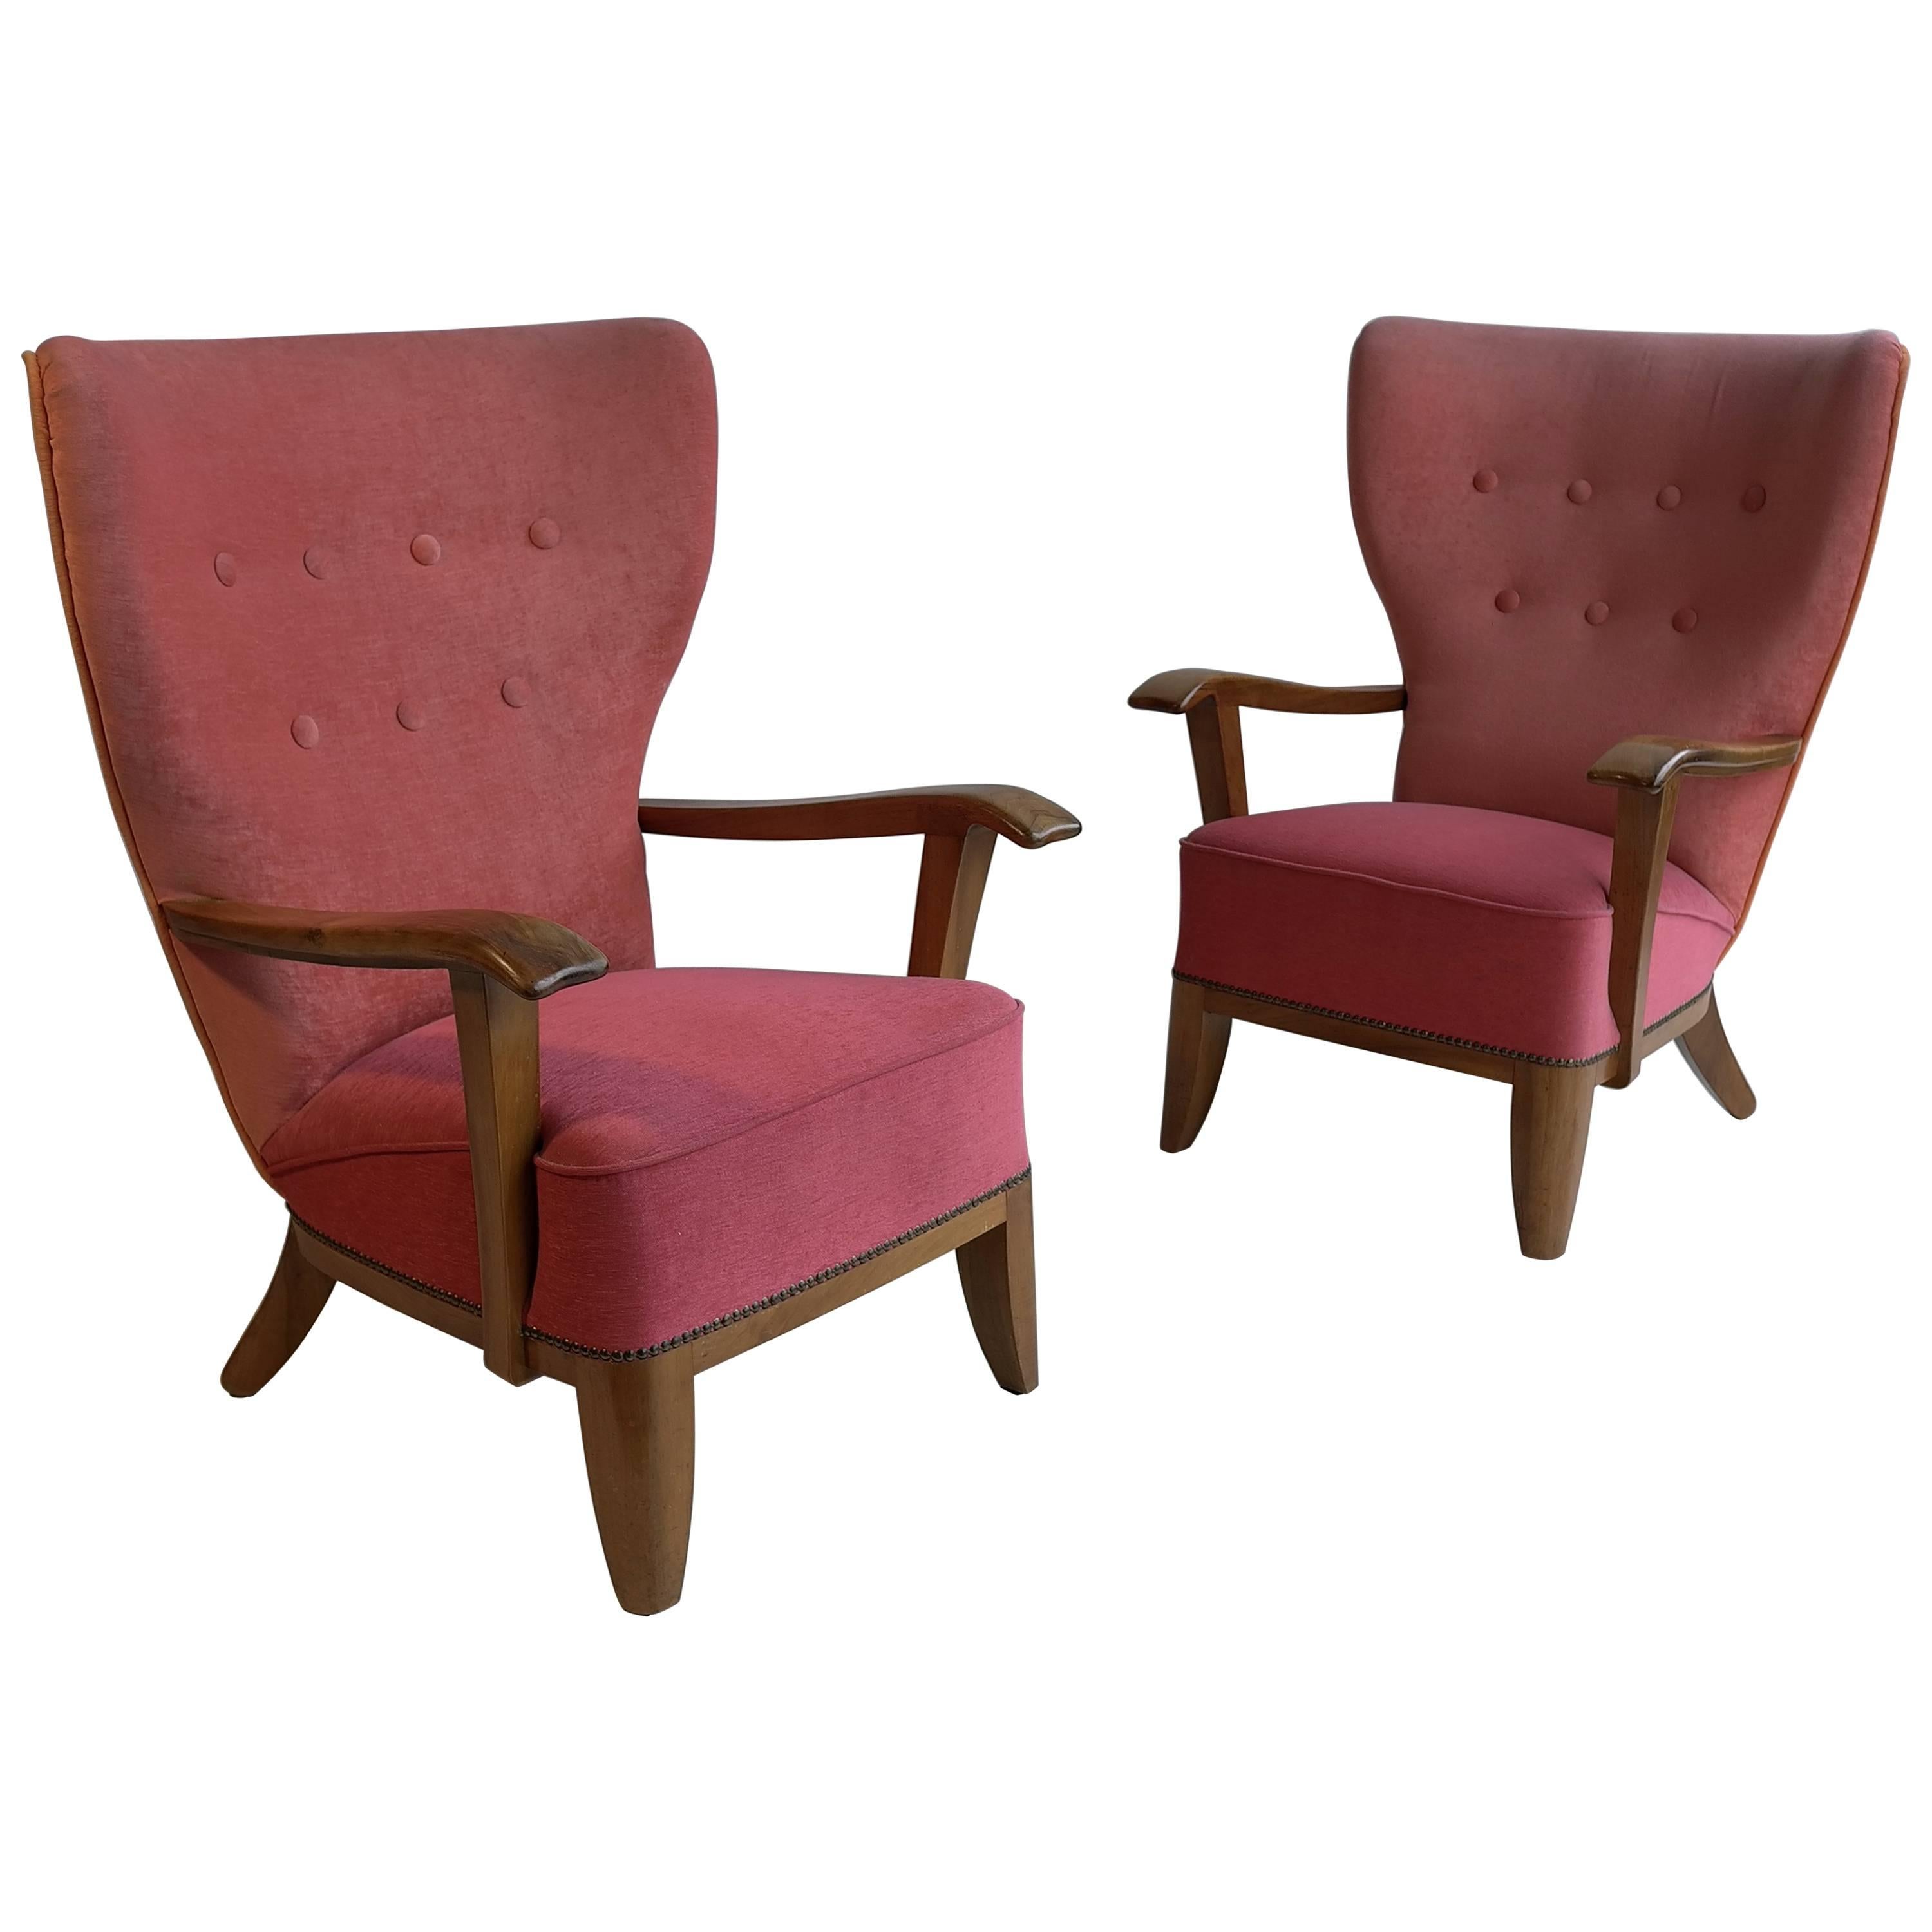 Pair of Three-Tone Wingback Armchairs, France, 1940s